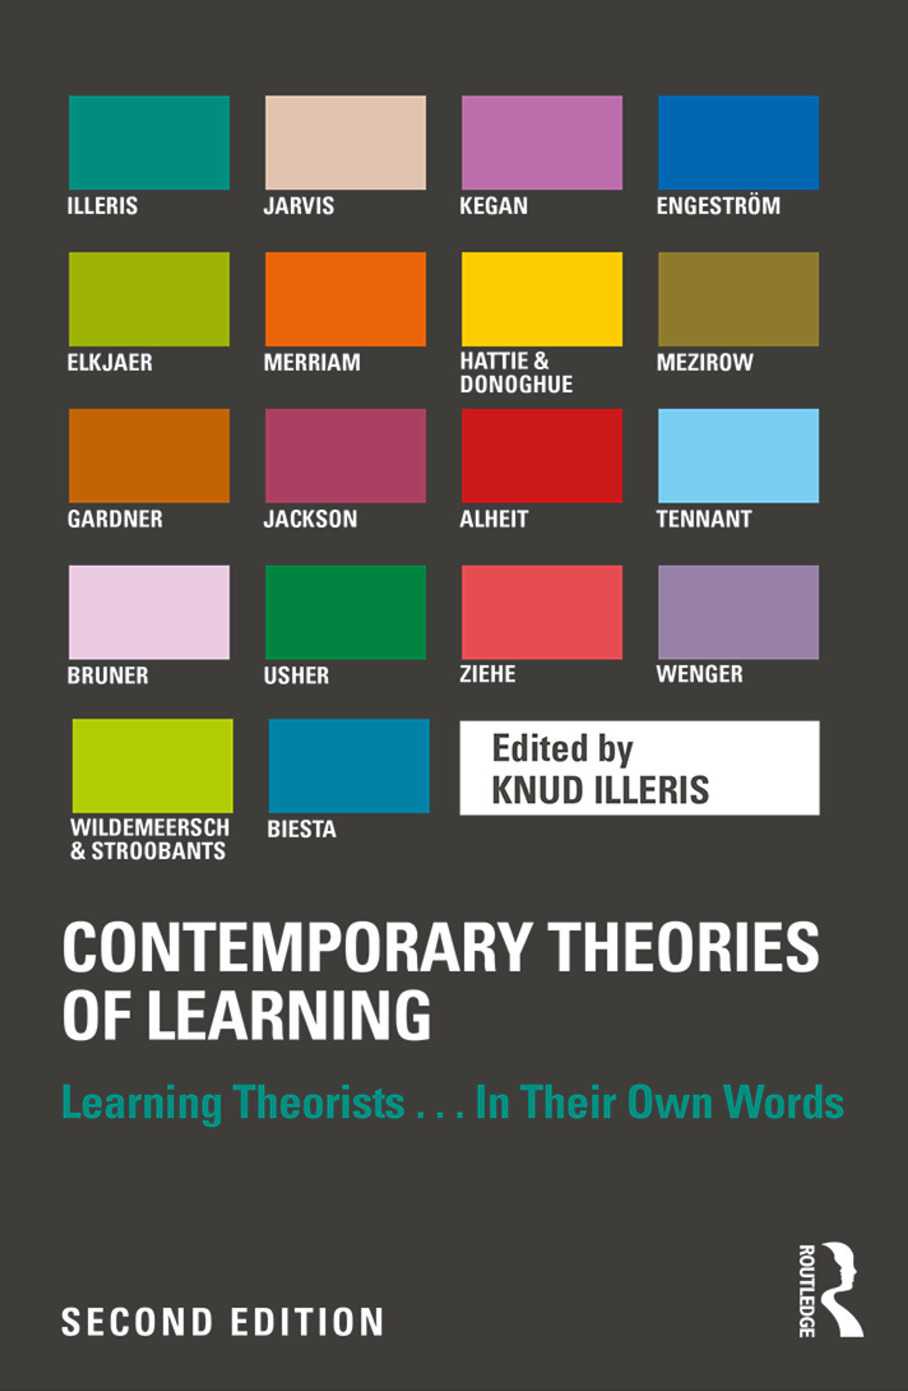 Contemporary Theories of Learning; Knud Illeris; 2018